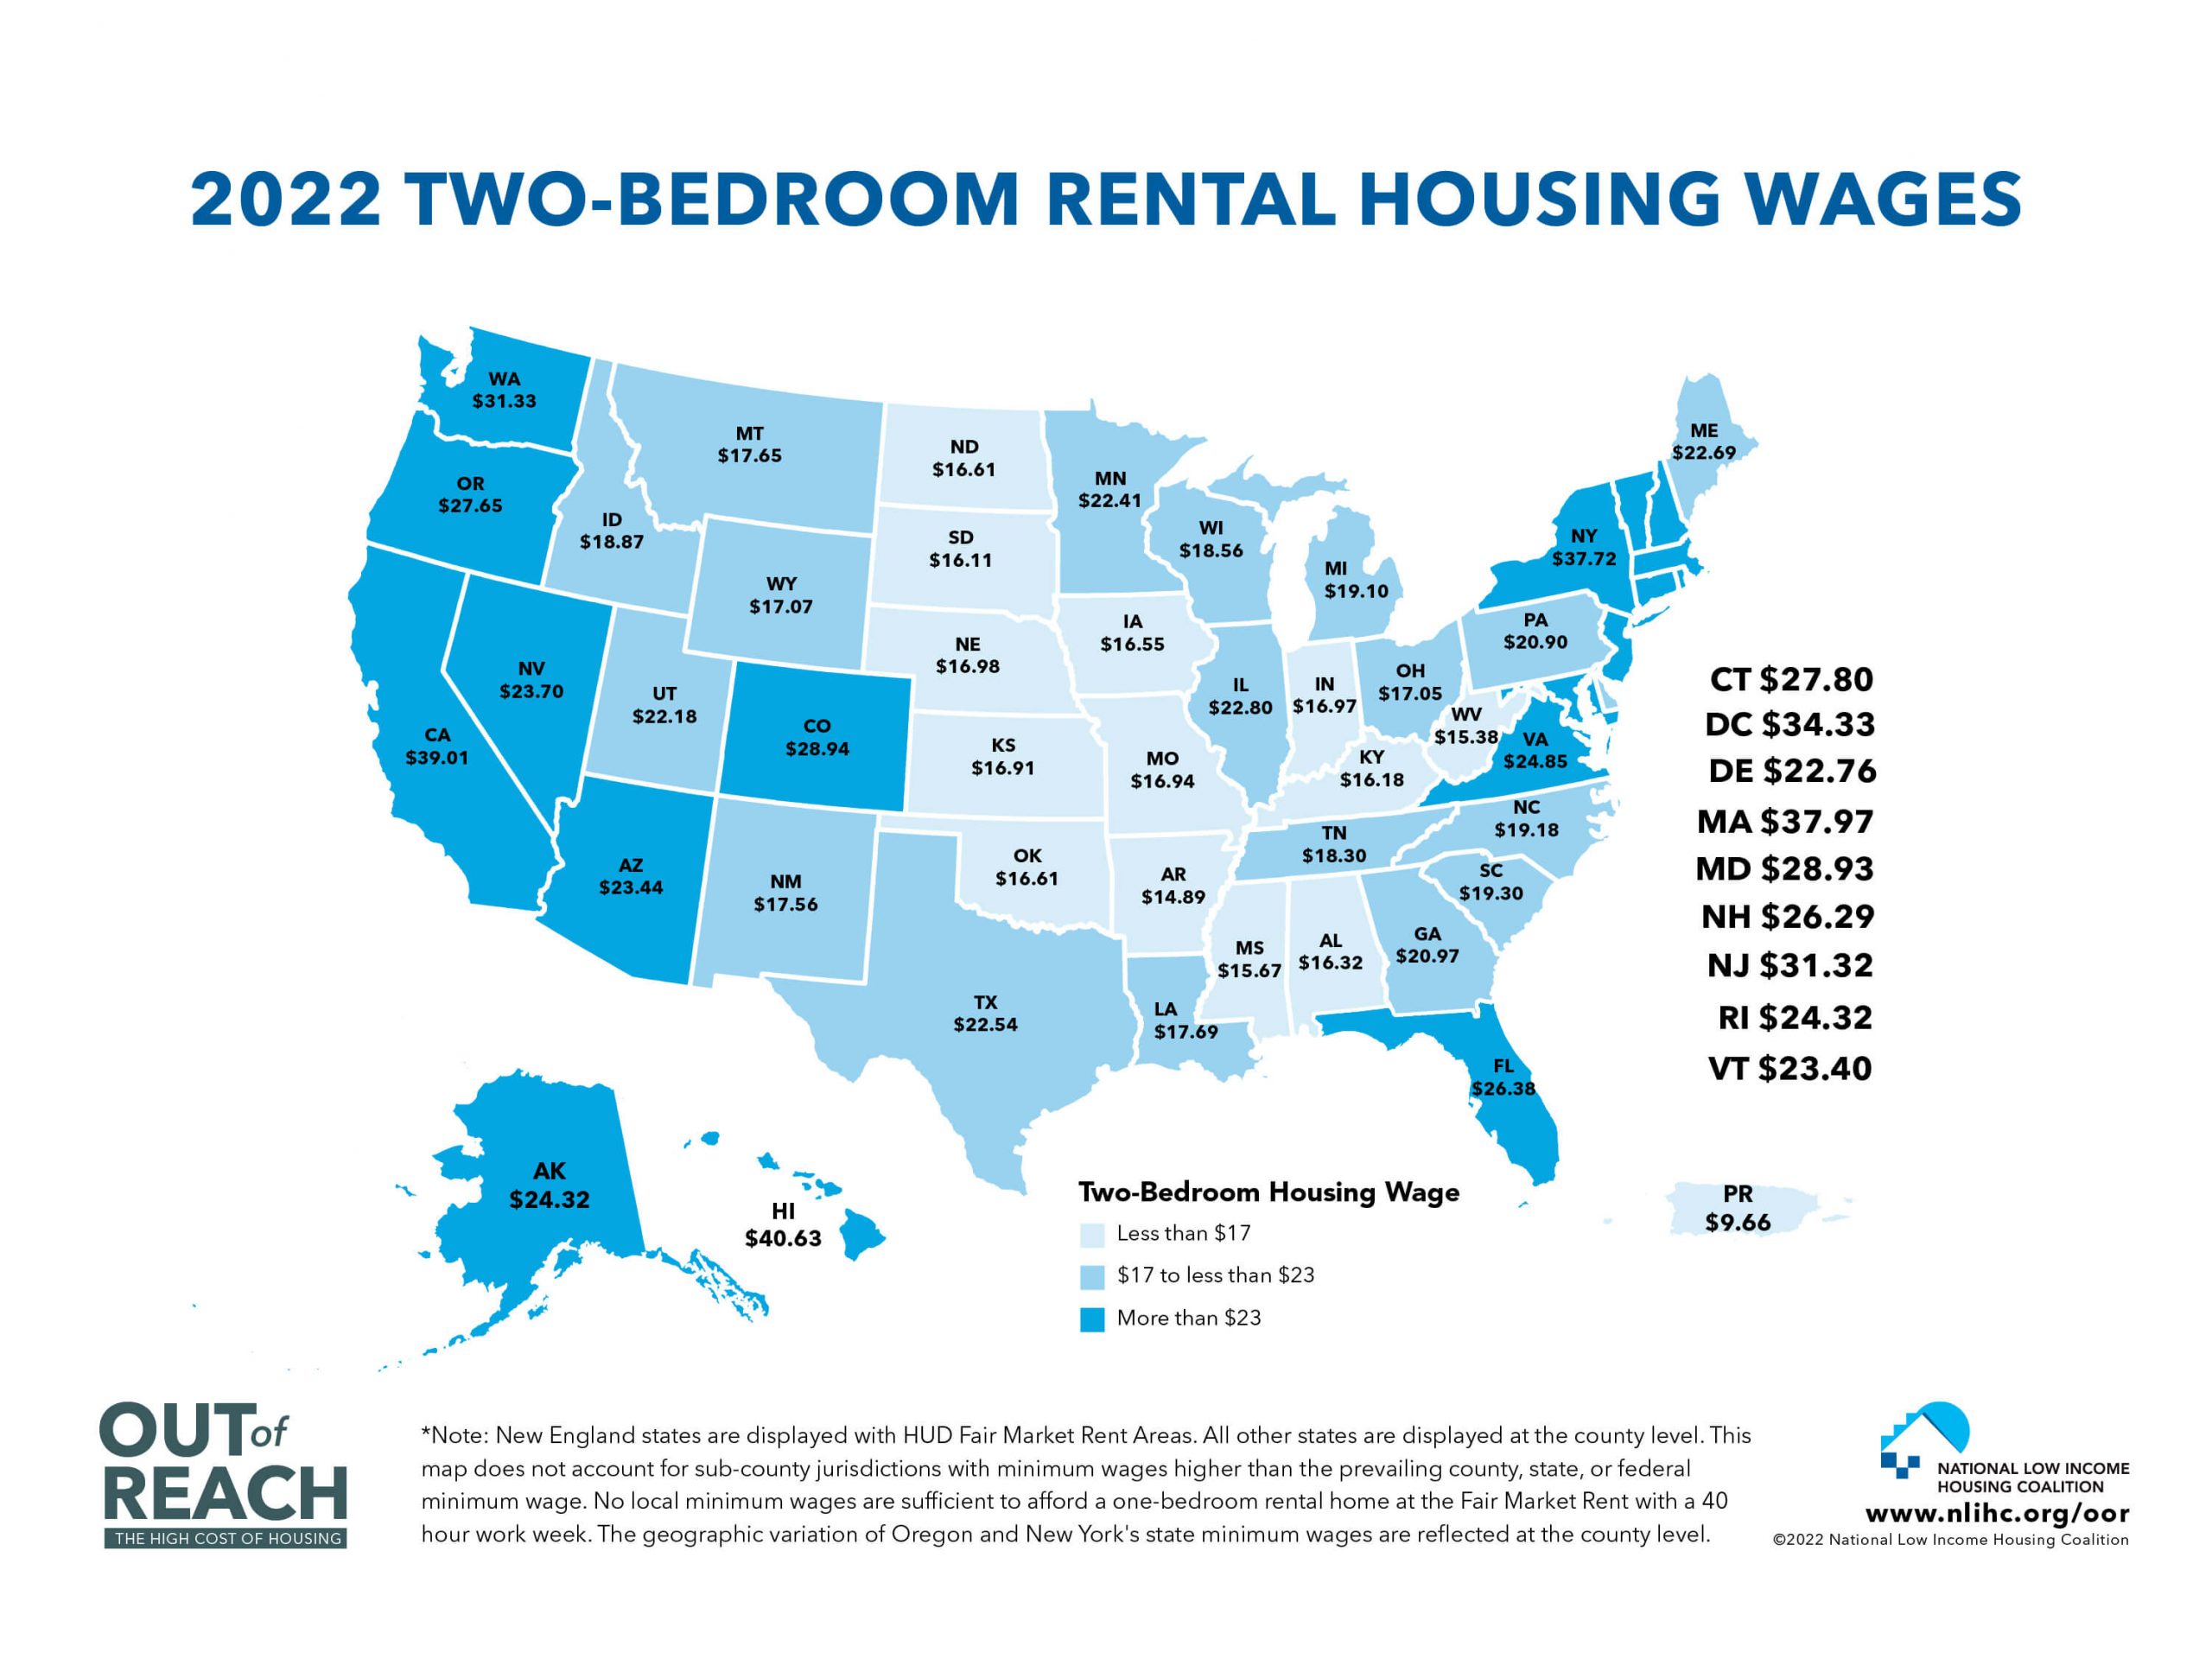 U.S. map shows 2 bedroom rental housing wages for 2020